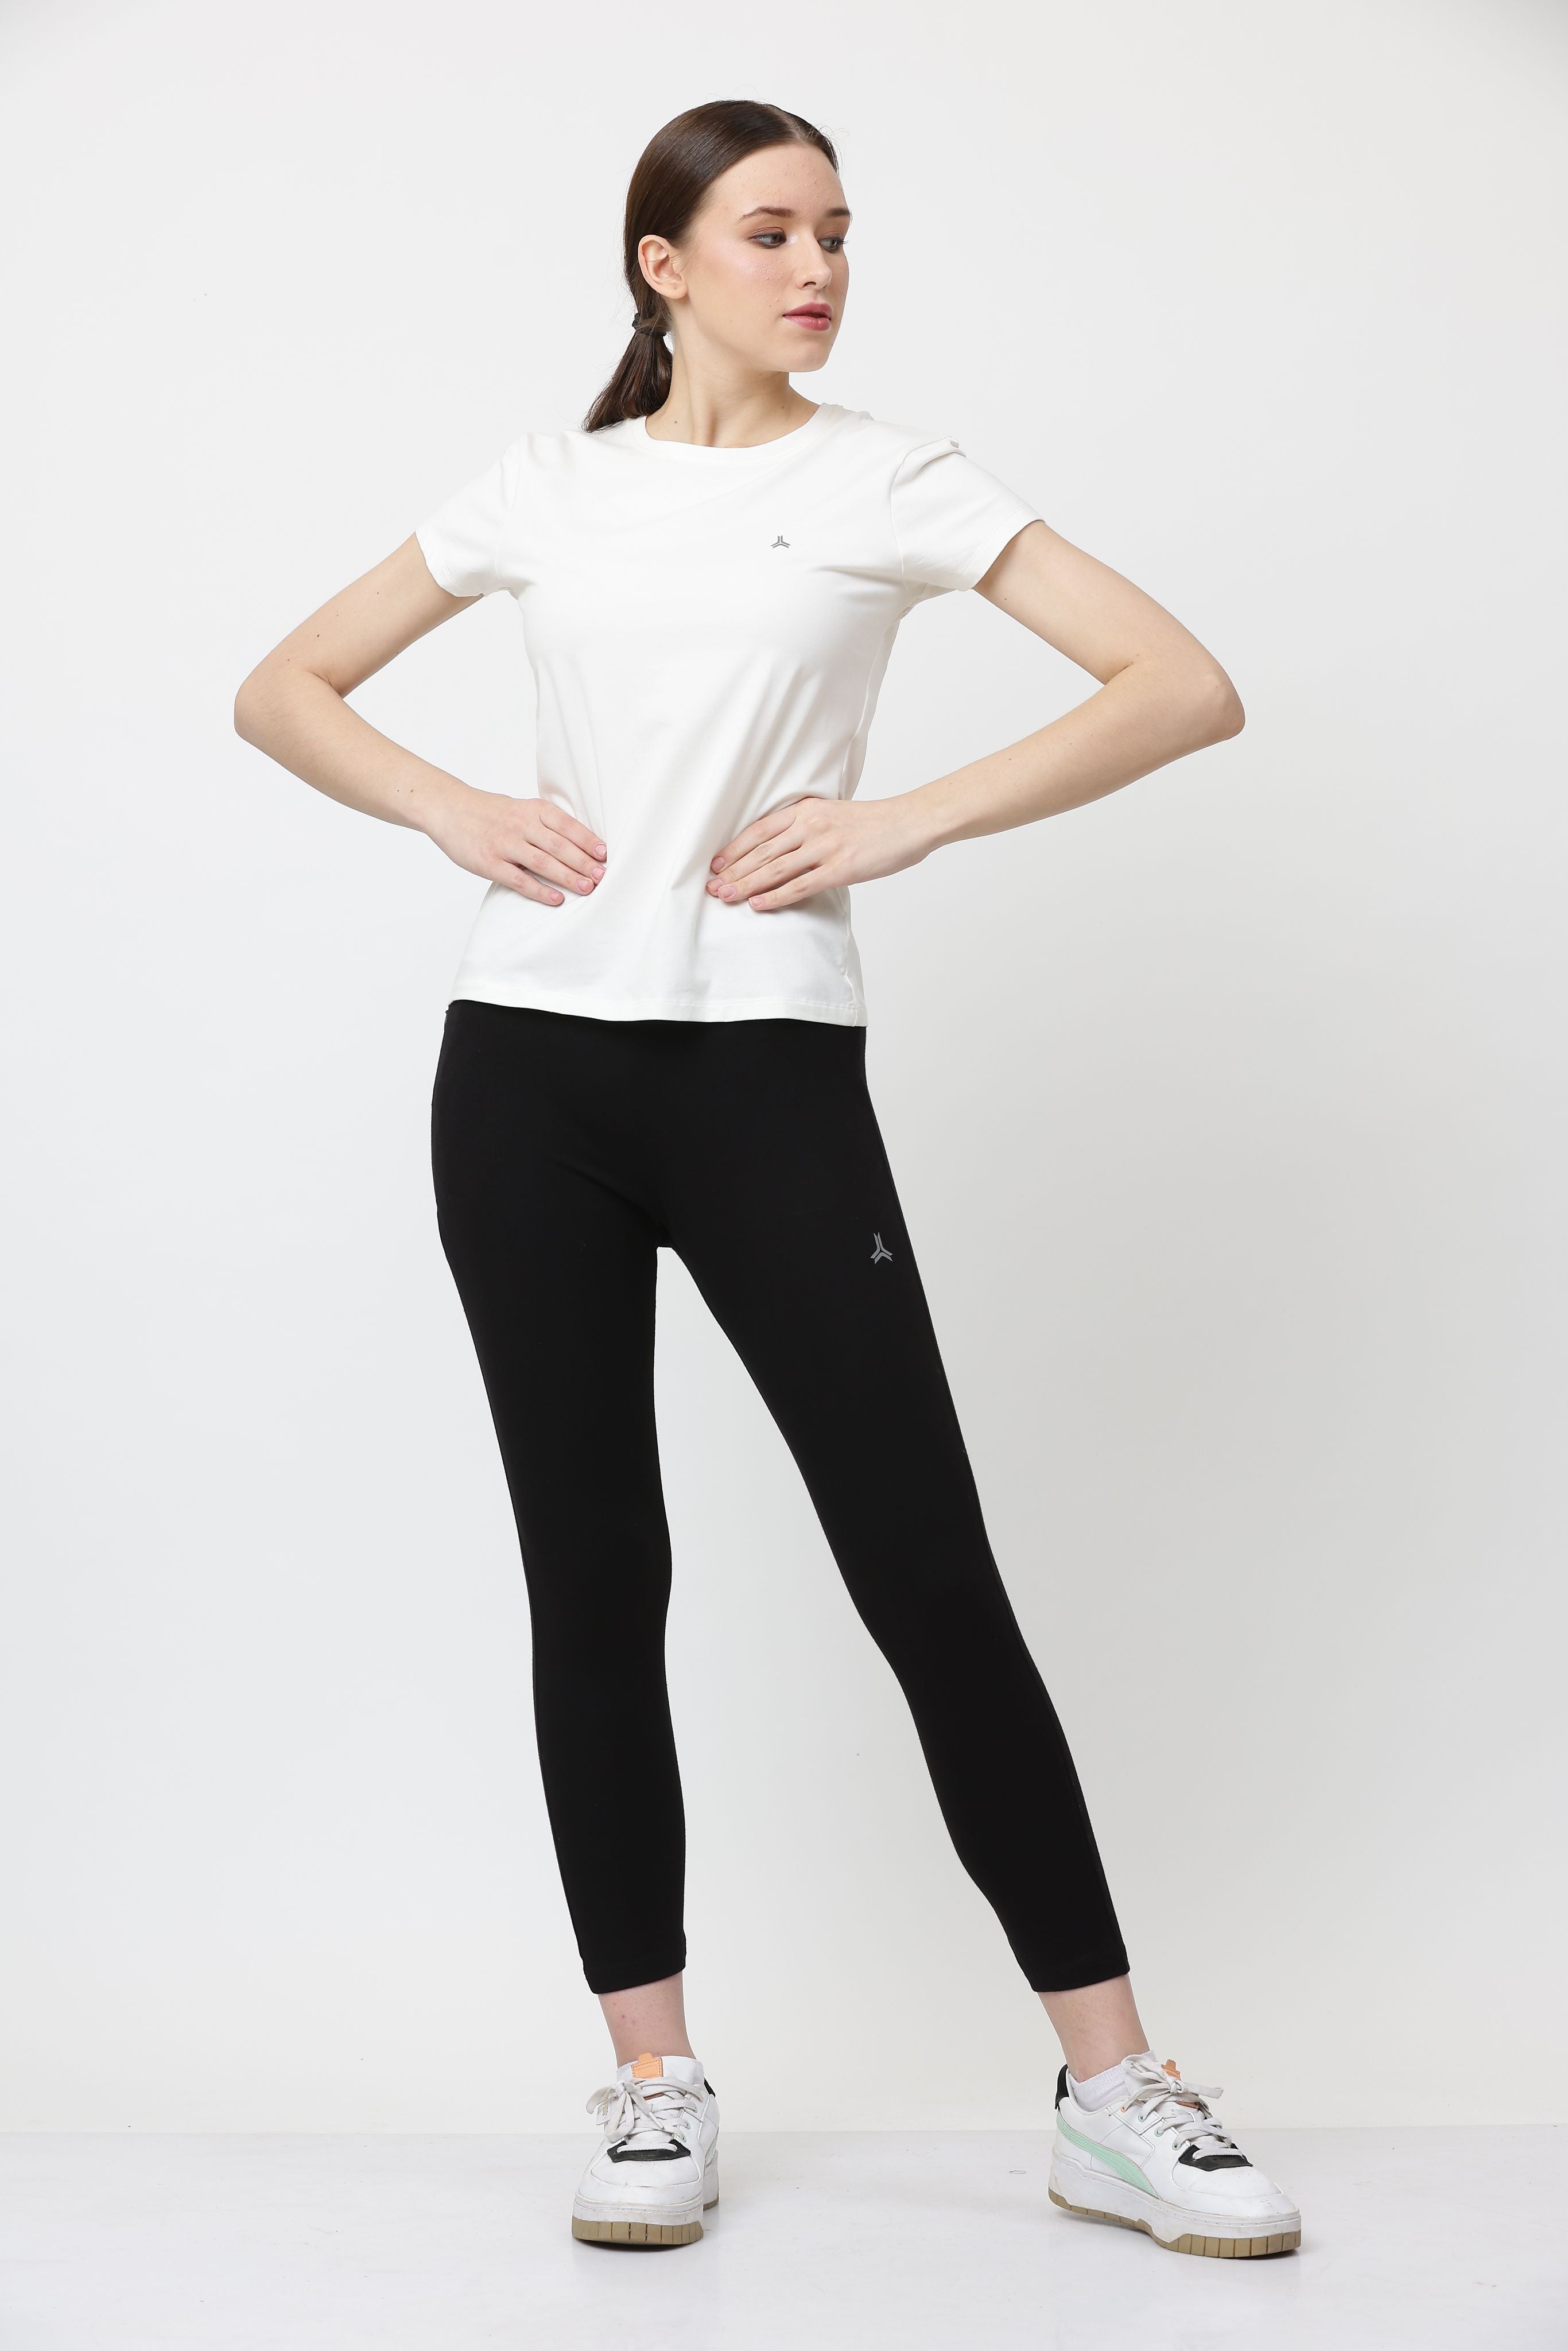 Women Crew Neck Solid T Shirt Style No-3025(6P)